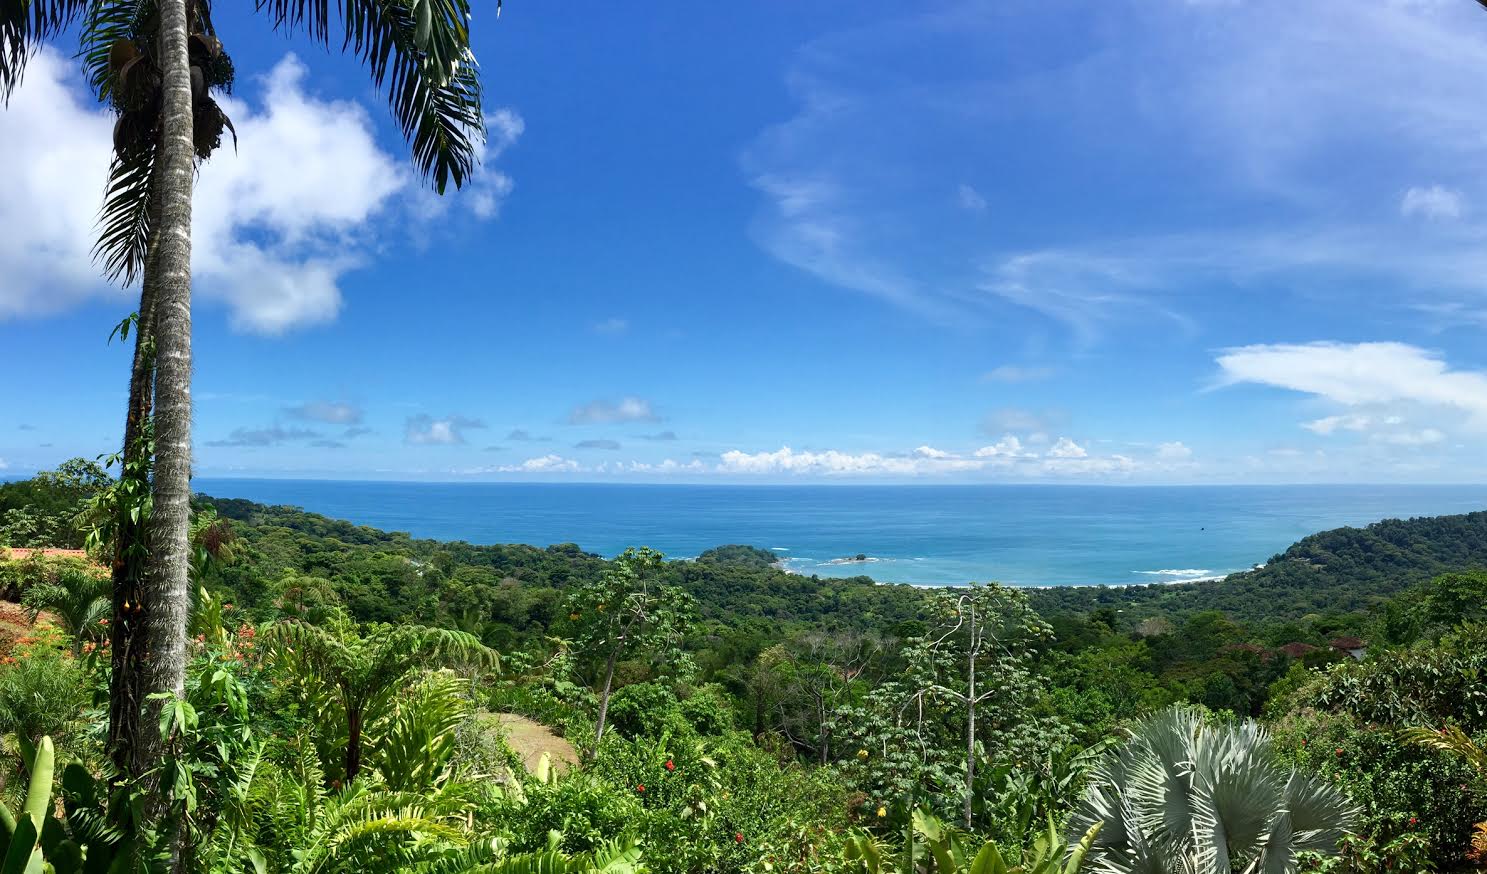 Buying a Property in Costa Rica